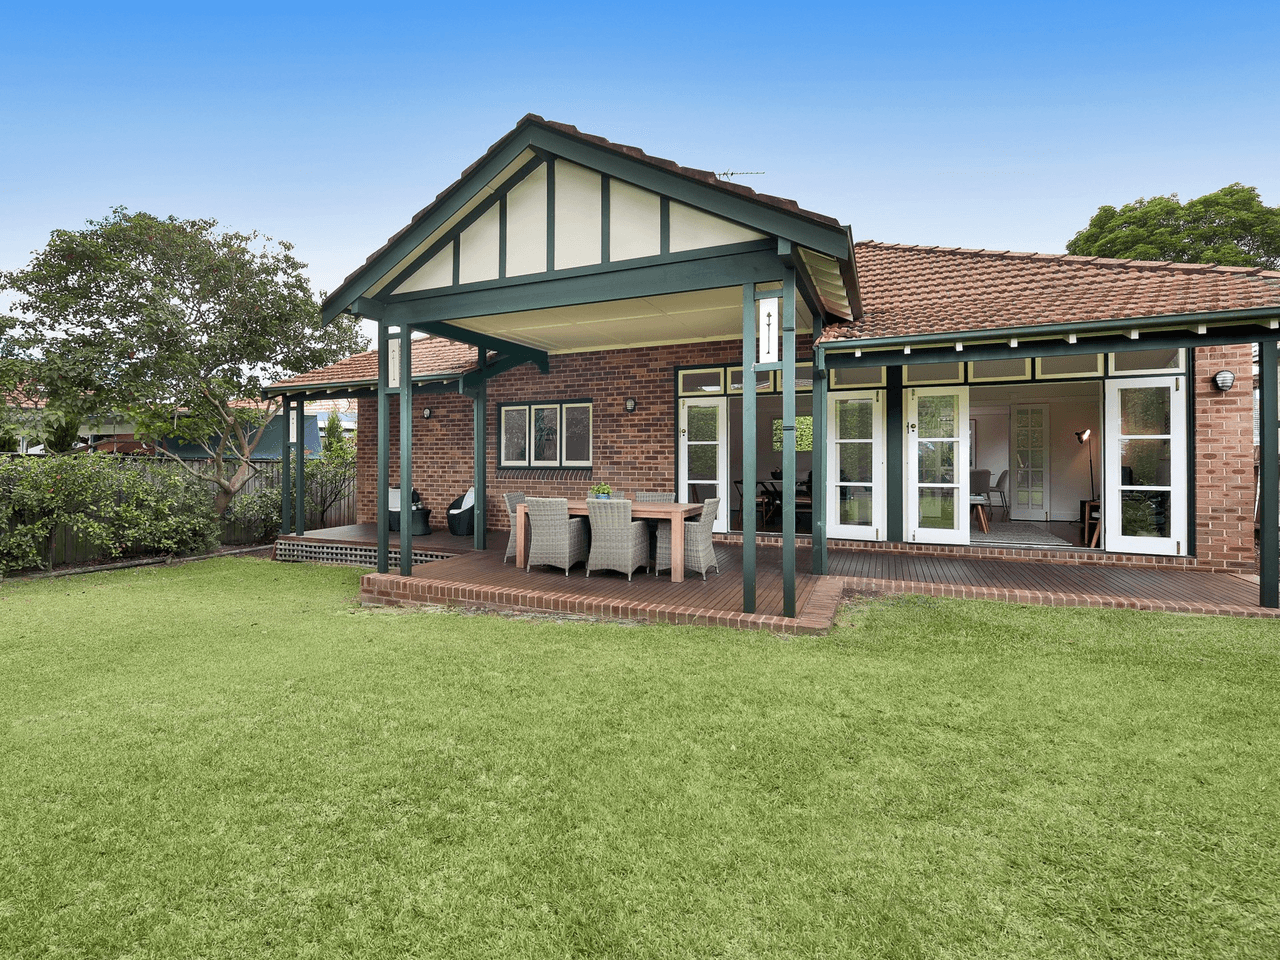 25 Alexander Avenue, WILLOUGHBY, NSW 2068